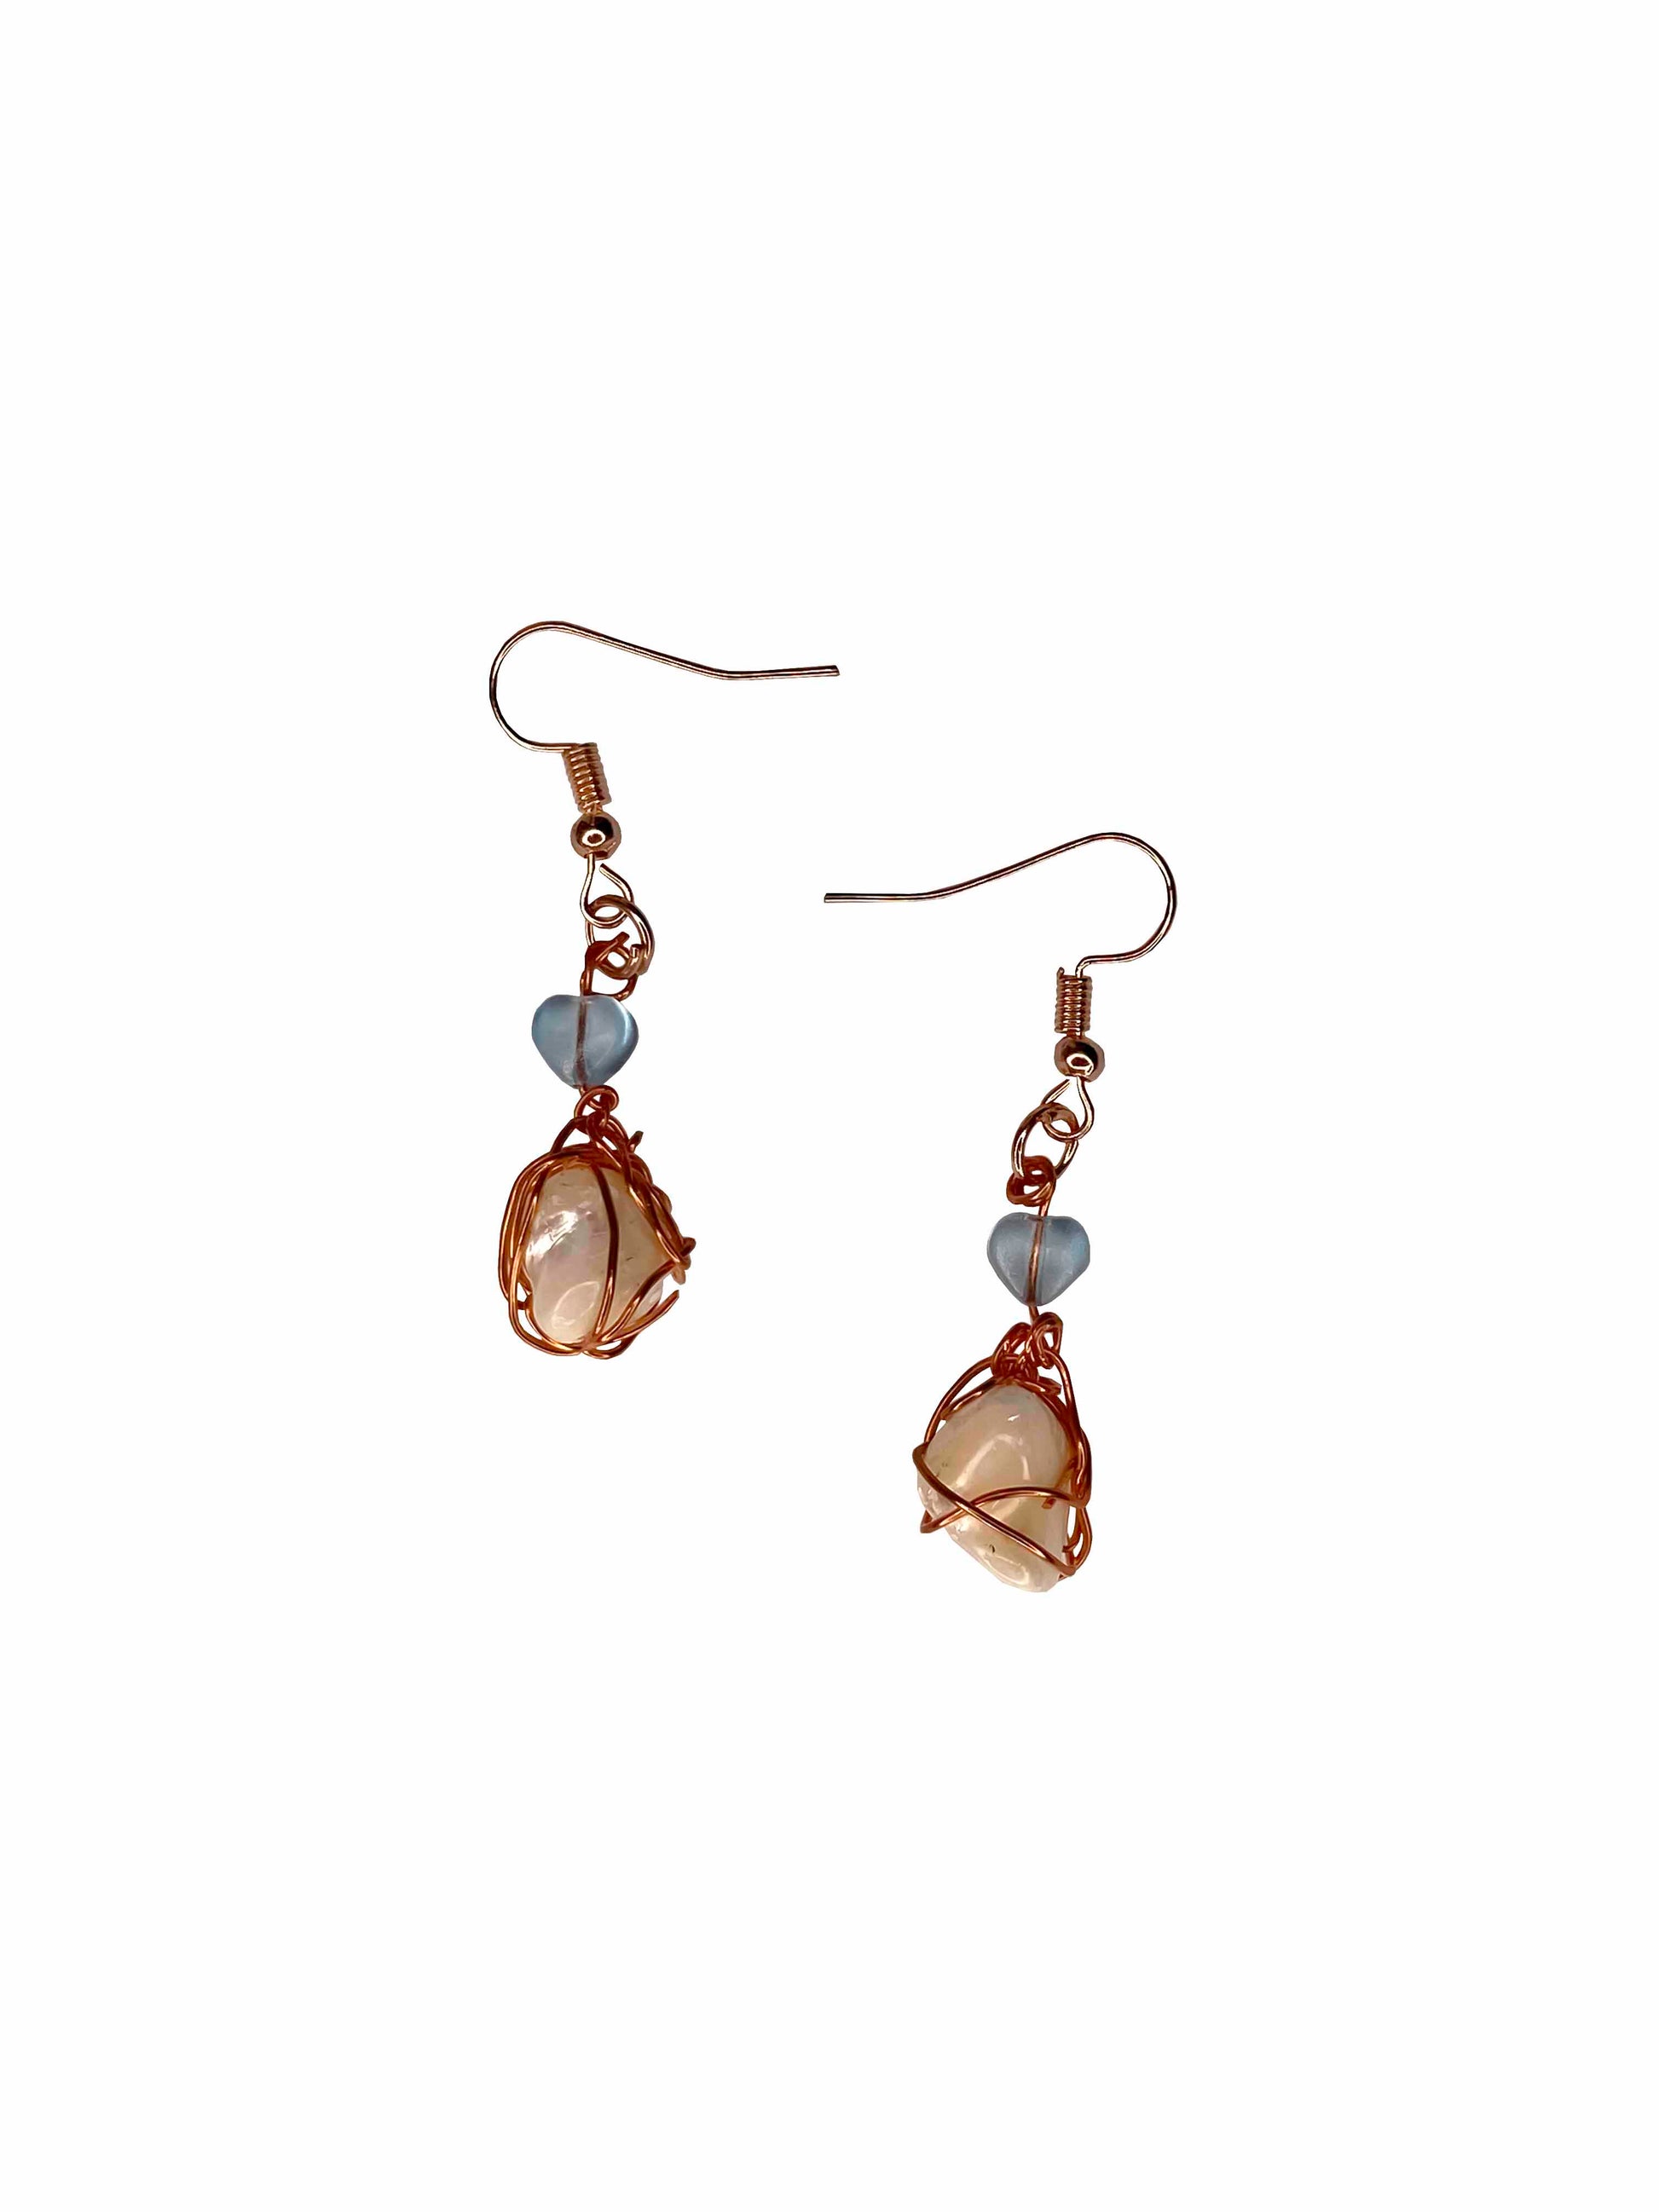 A pair of handmade copper wire wrapped large freshwater pearl earrings.